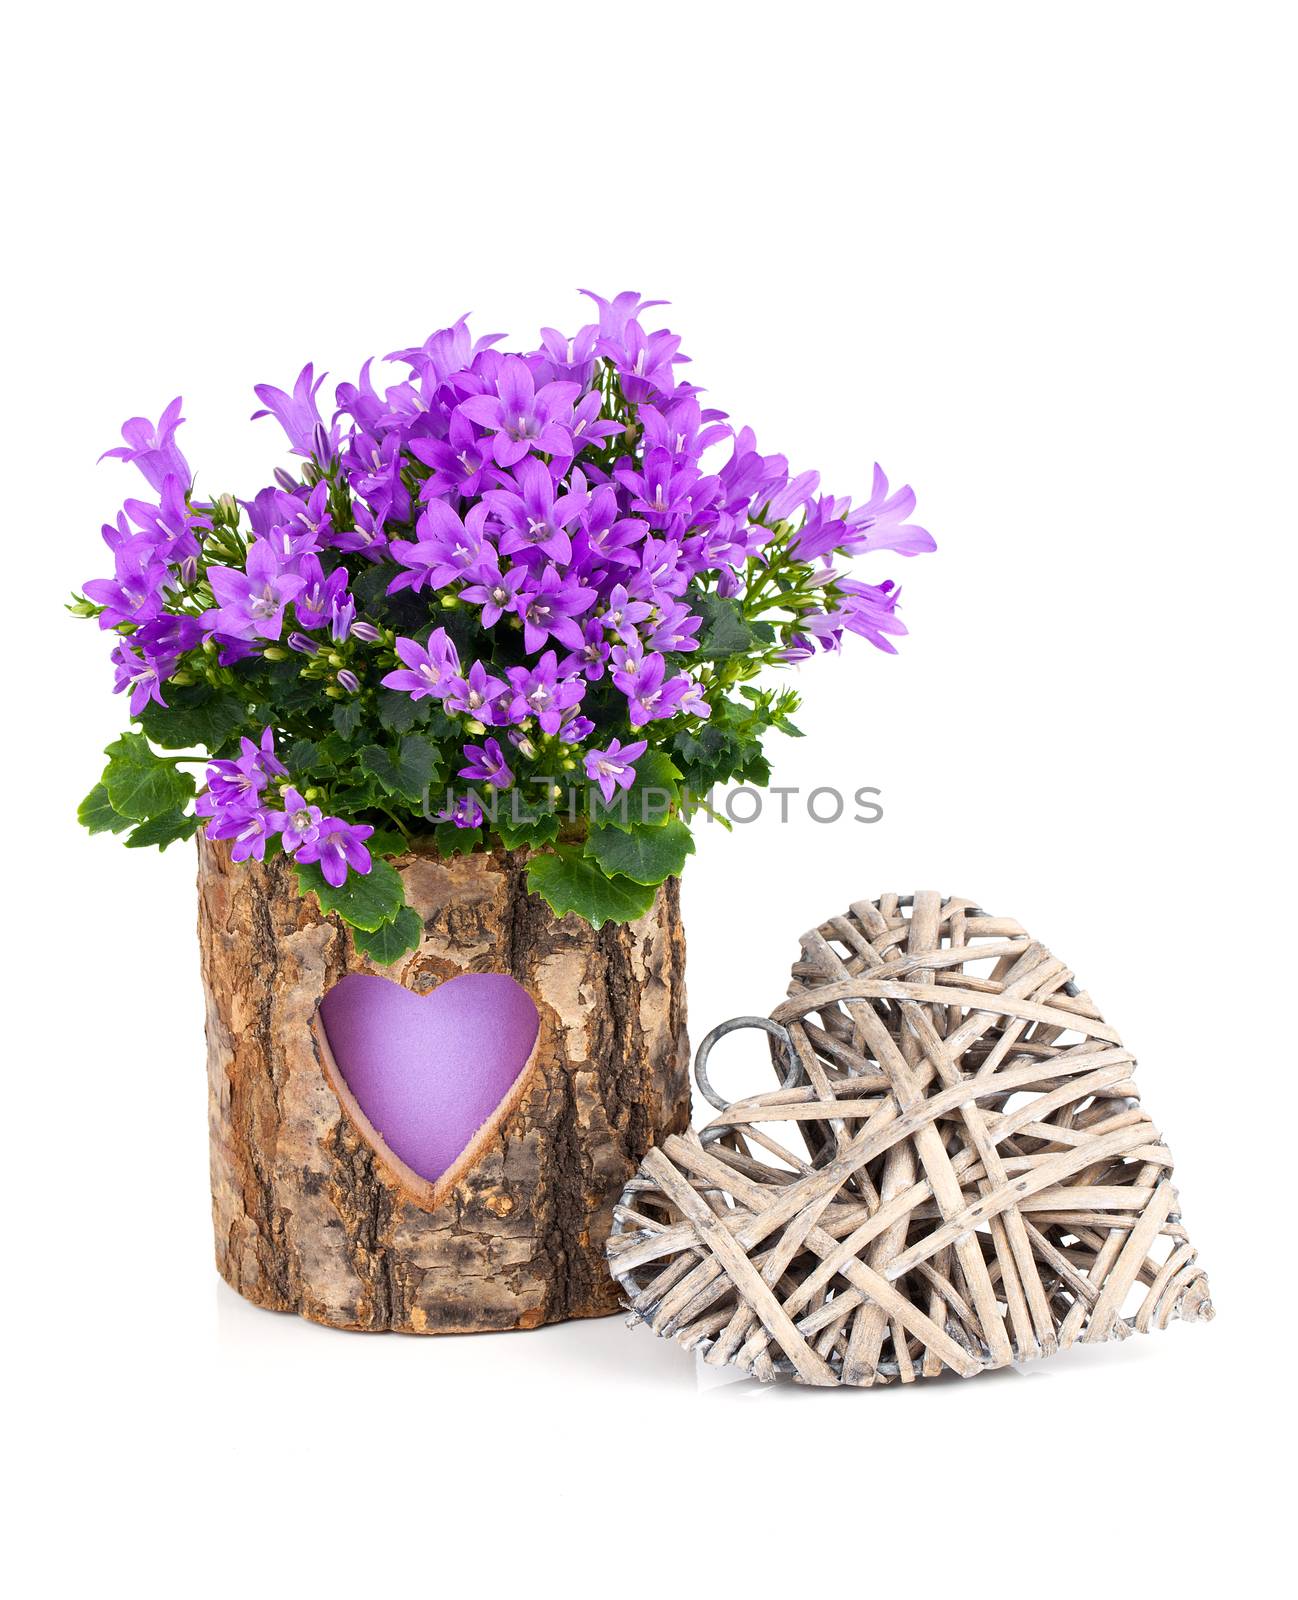 blue campanula flowers for Valentine's Day with wooden heart, on by motorolka